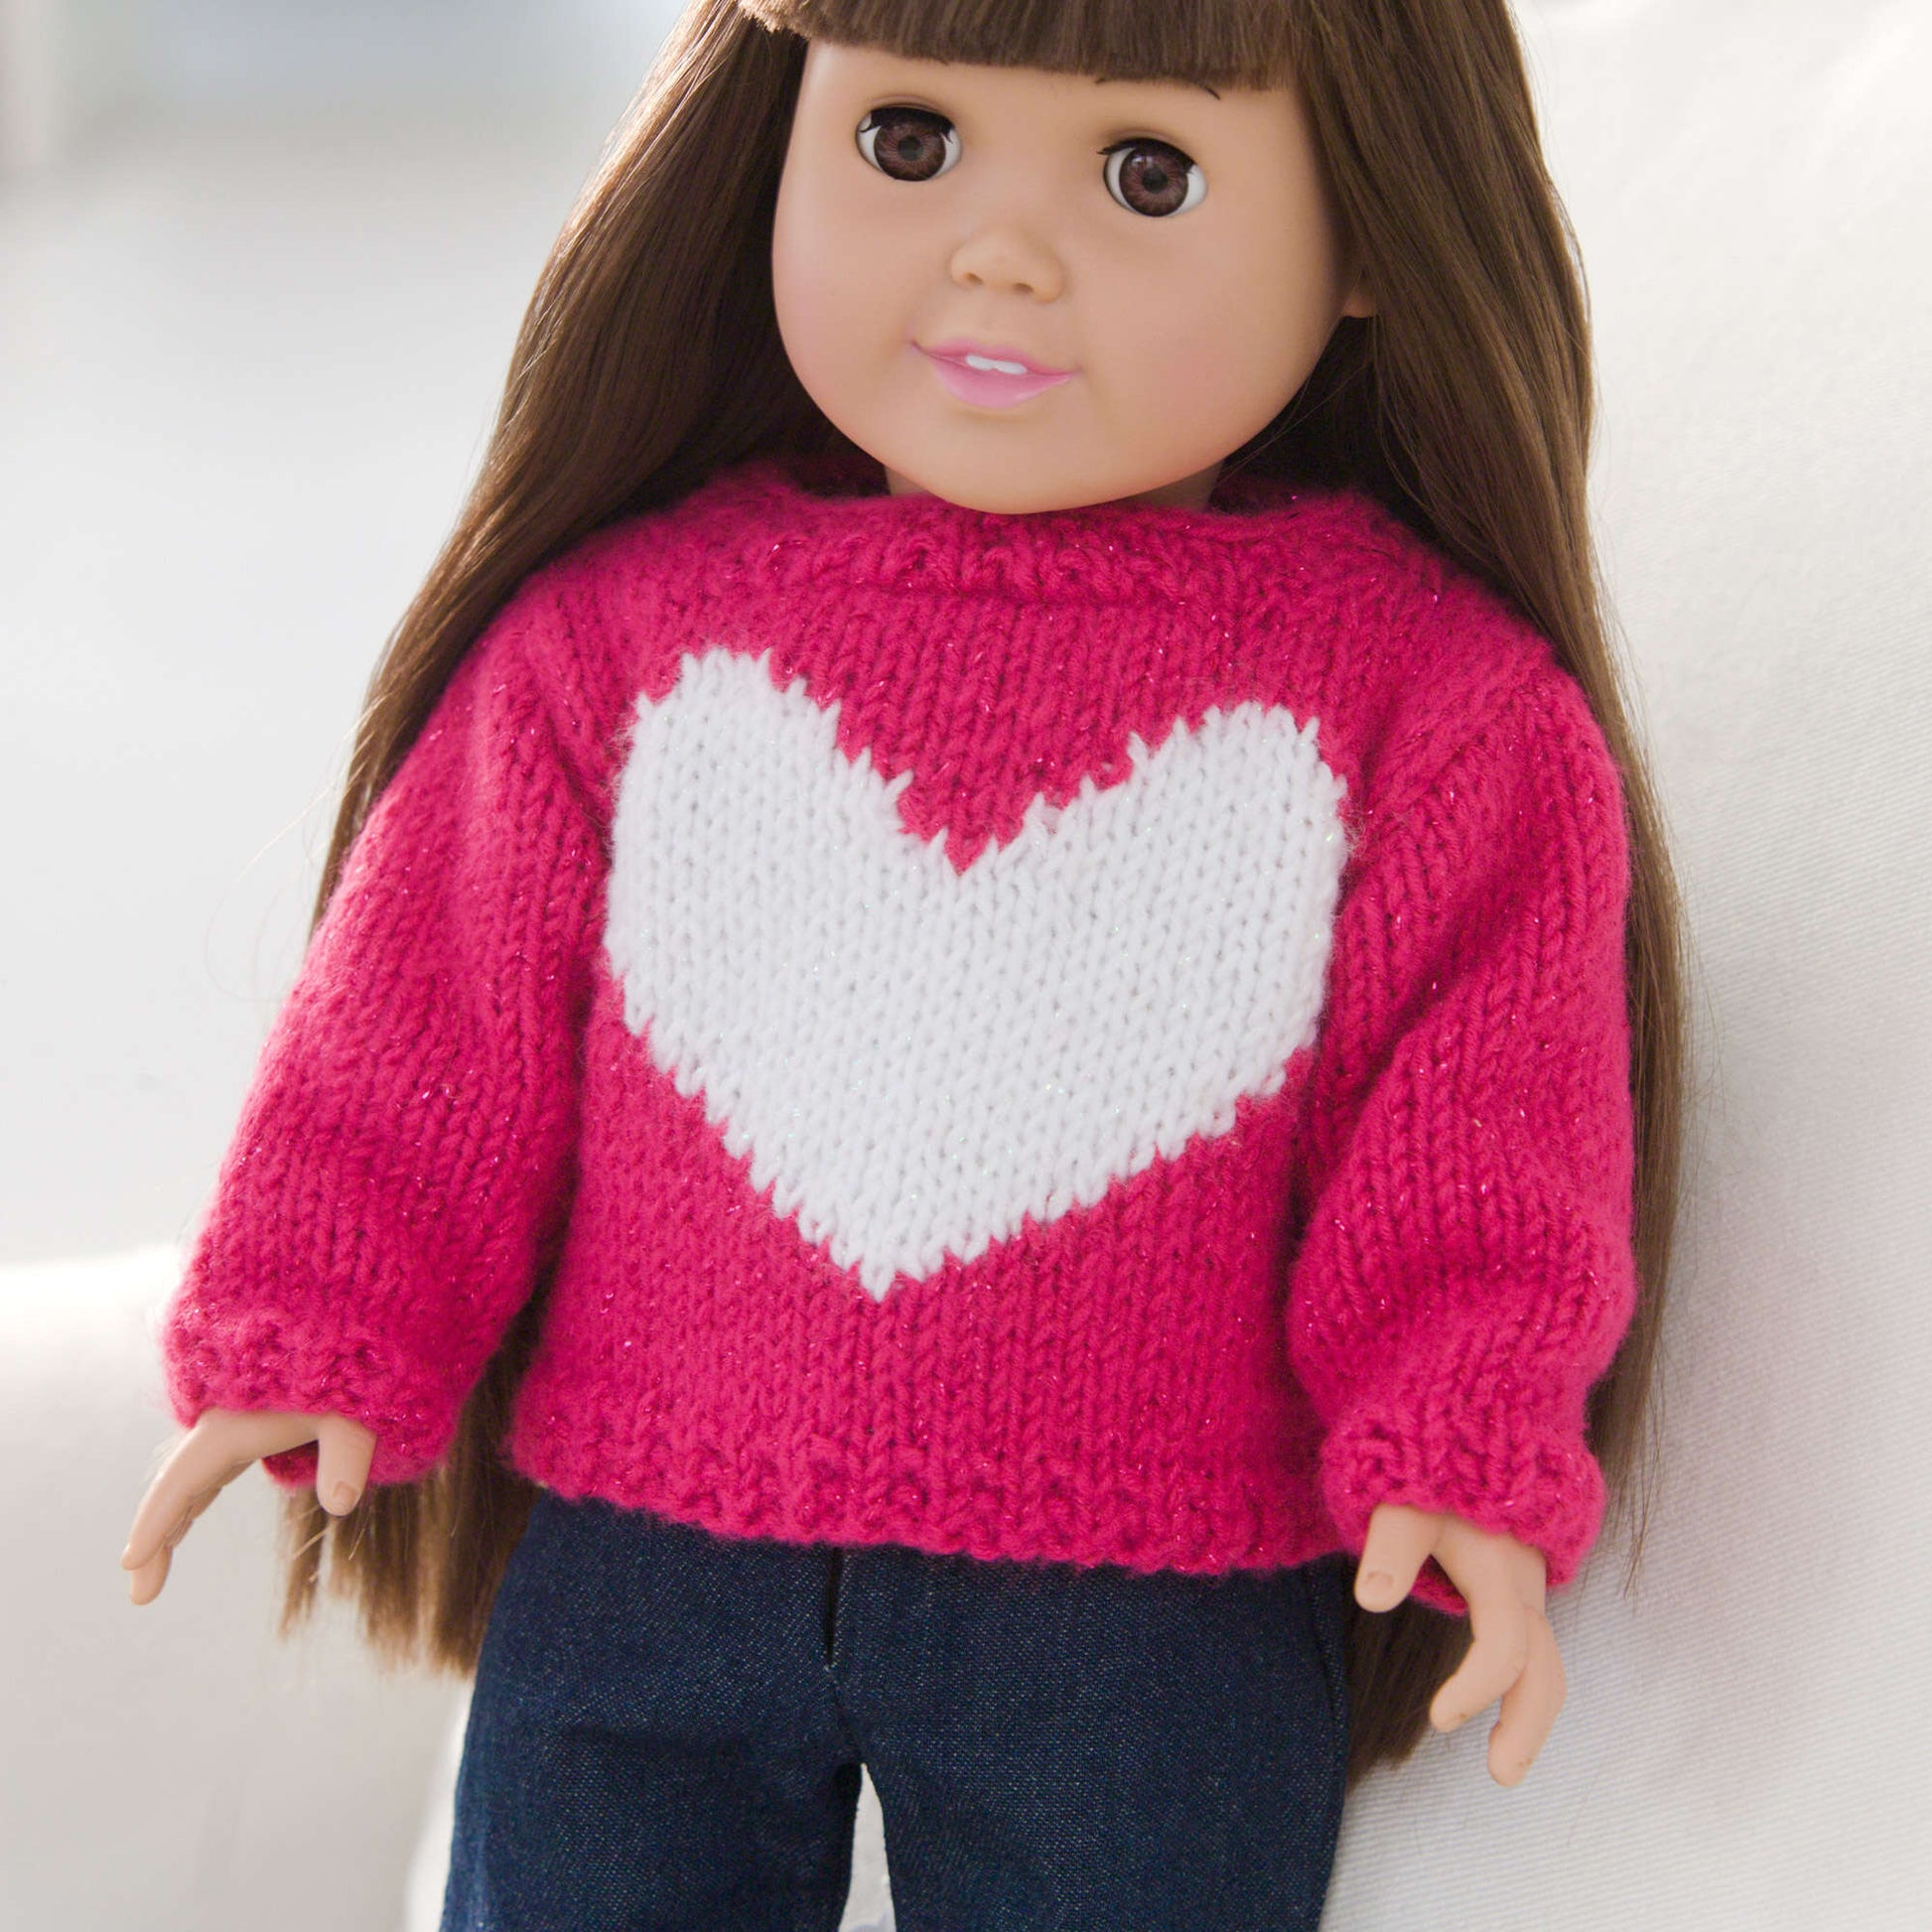 Red Heart Love My Doll Sweater Red Heart Love My Doll Sweater